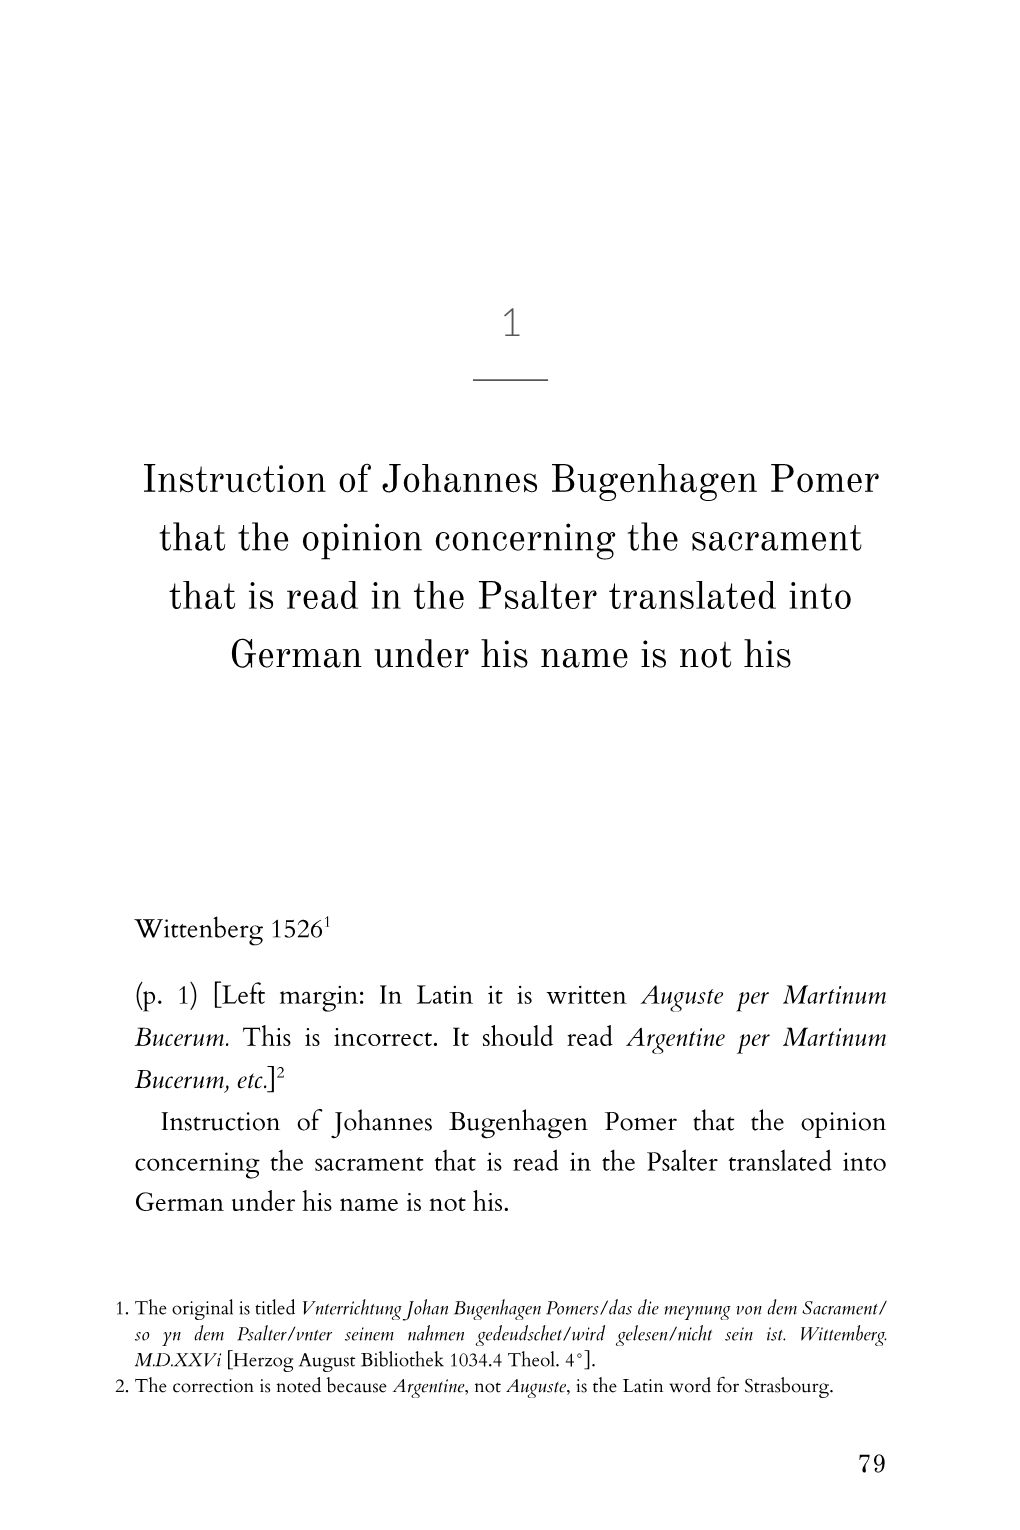 Johannes Bugenhagen Pomer That the Opinion Concerning the Sacrament That Is Read in the Psalter Translated Into German Under His Name Is Not His